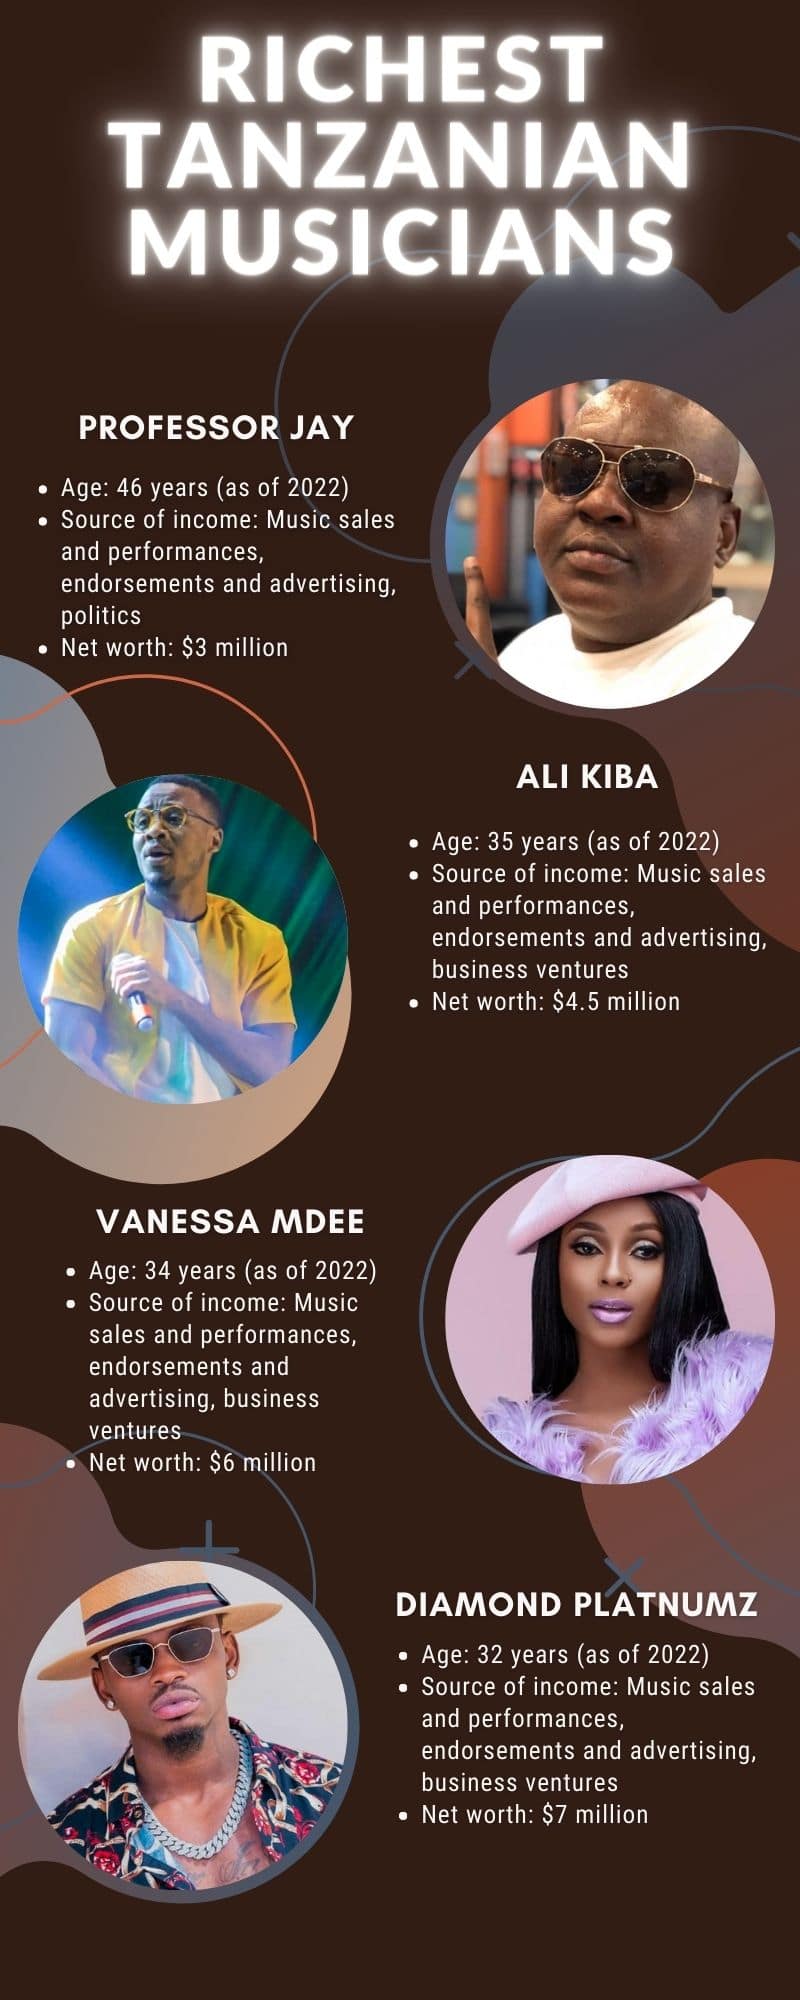 Top 10 richest Tanzanian musicians and their net worth in 2023